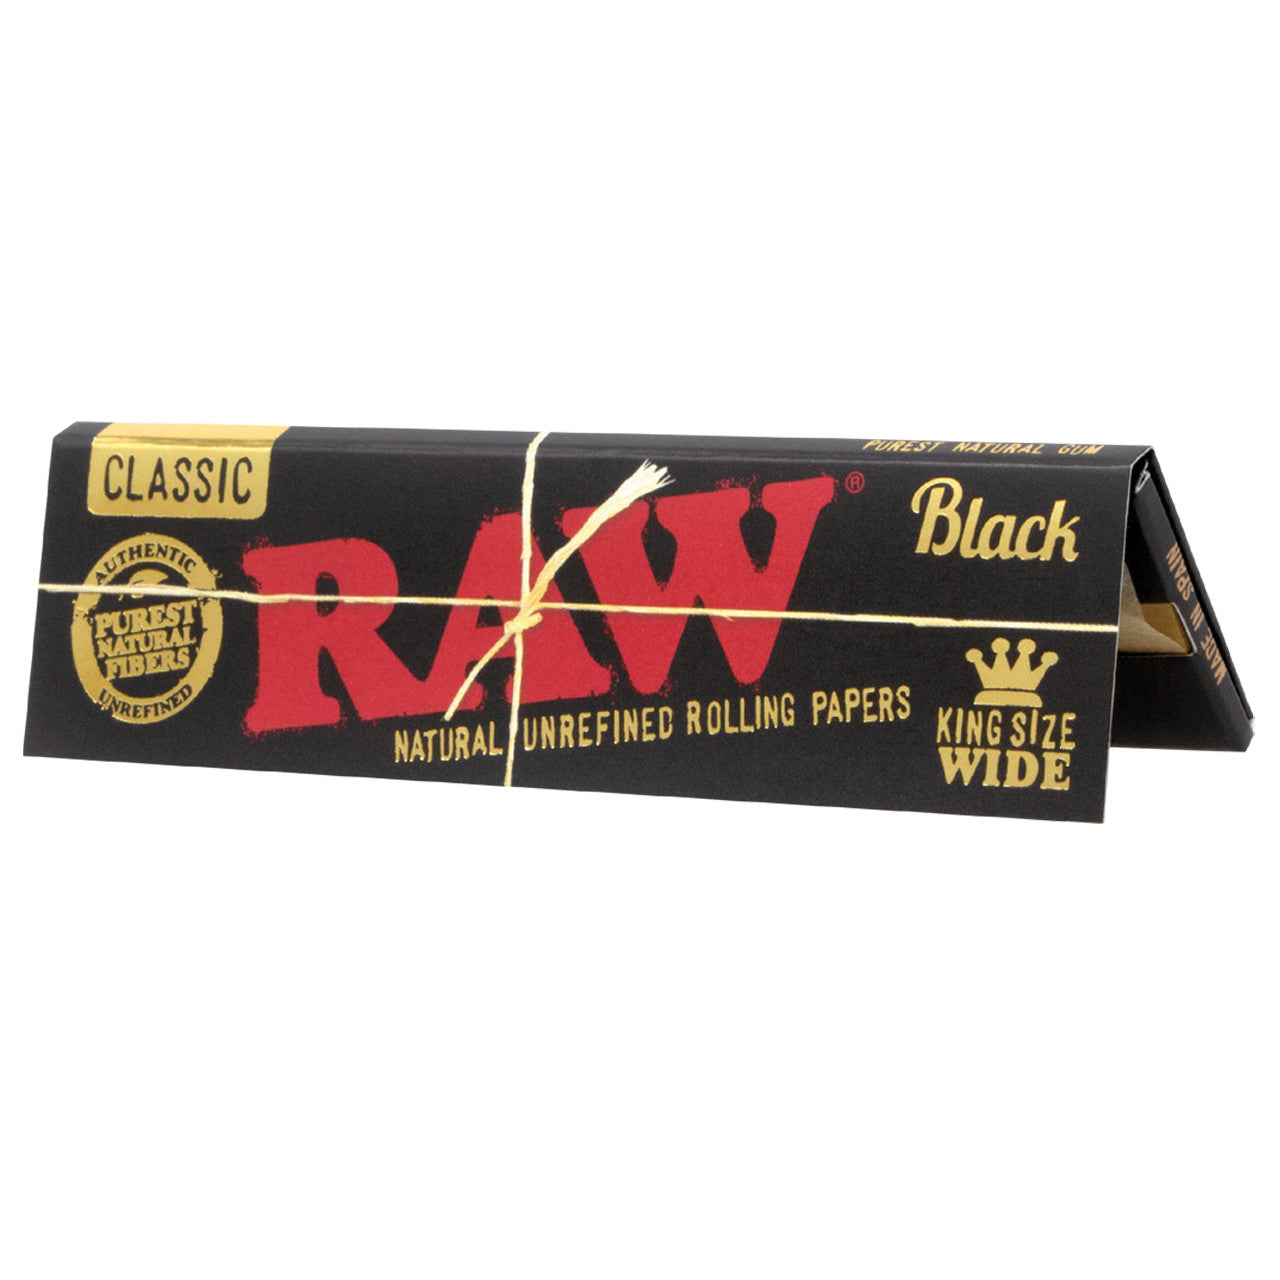 RAW Black King Size Rolling Papers (33ct)